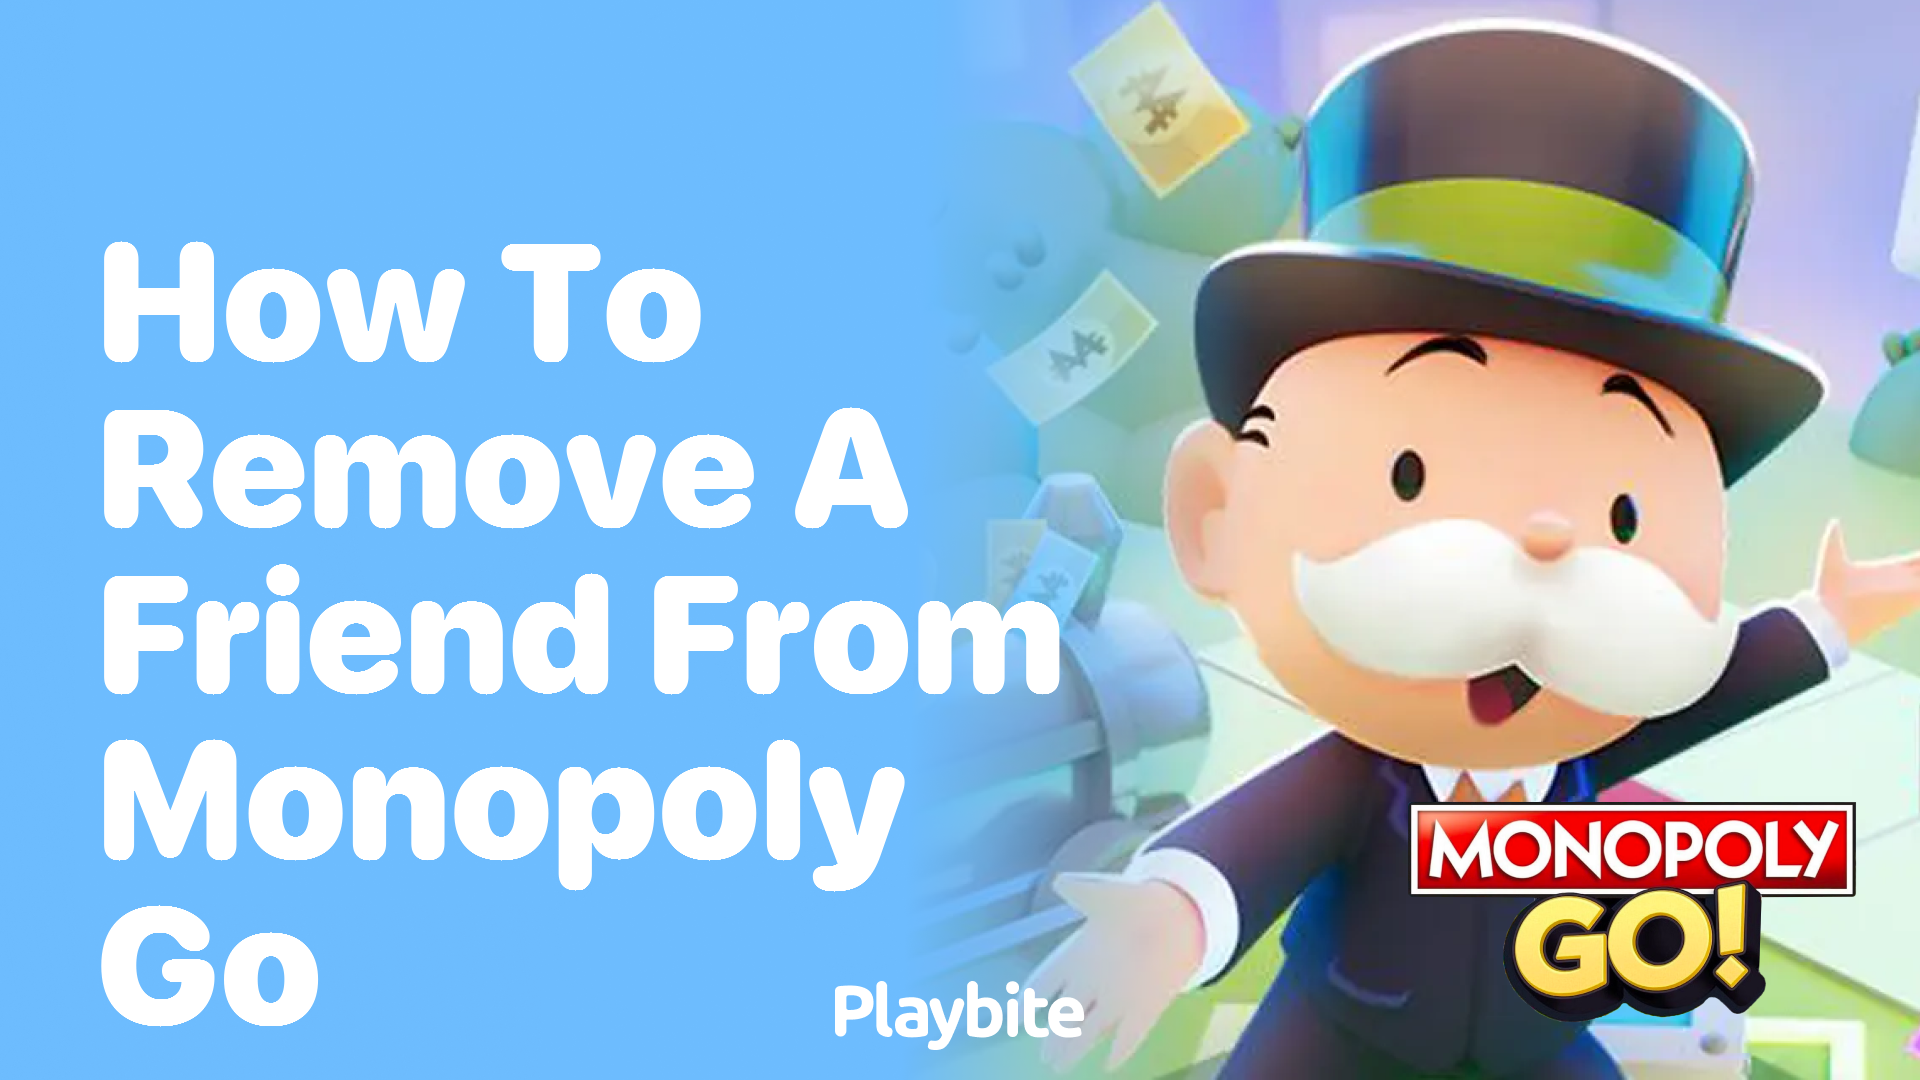 How to Remove a Friend from Monopoly Go